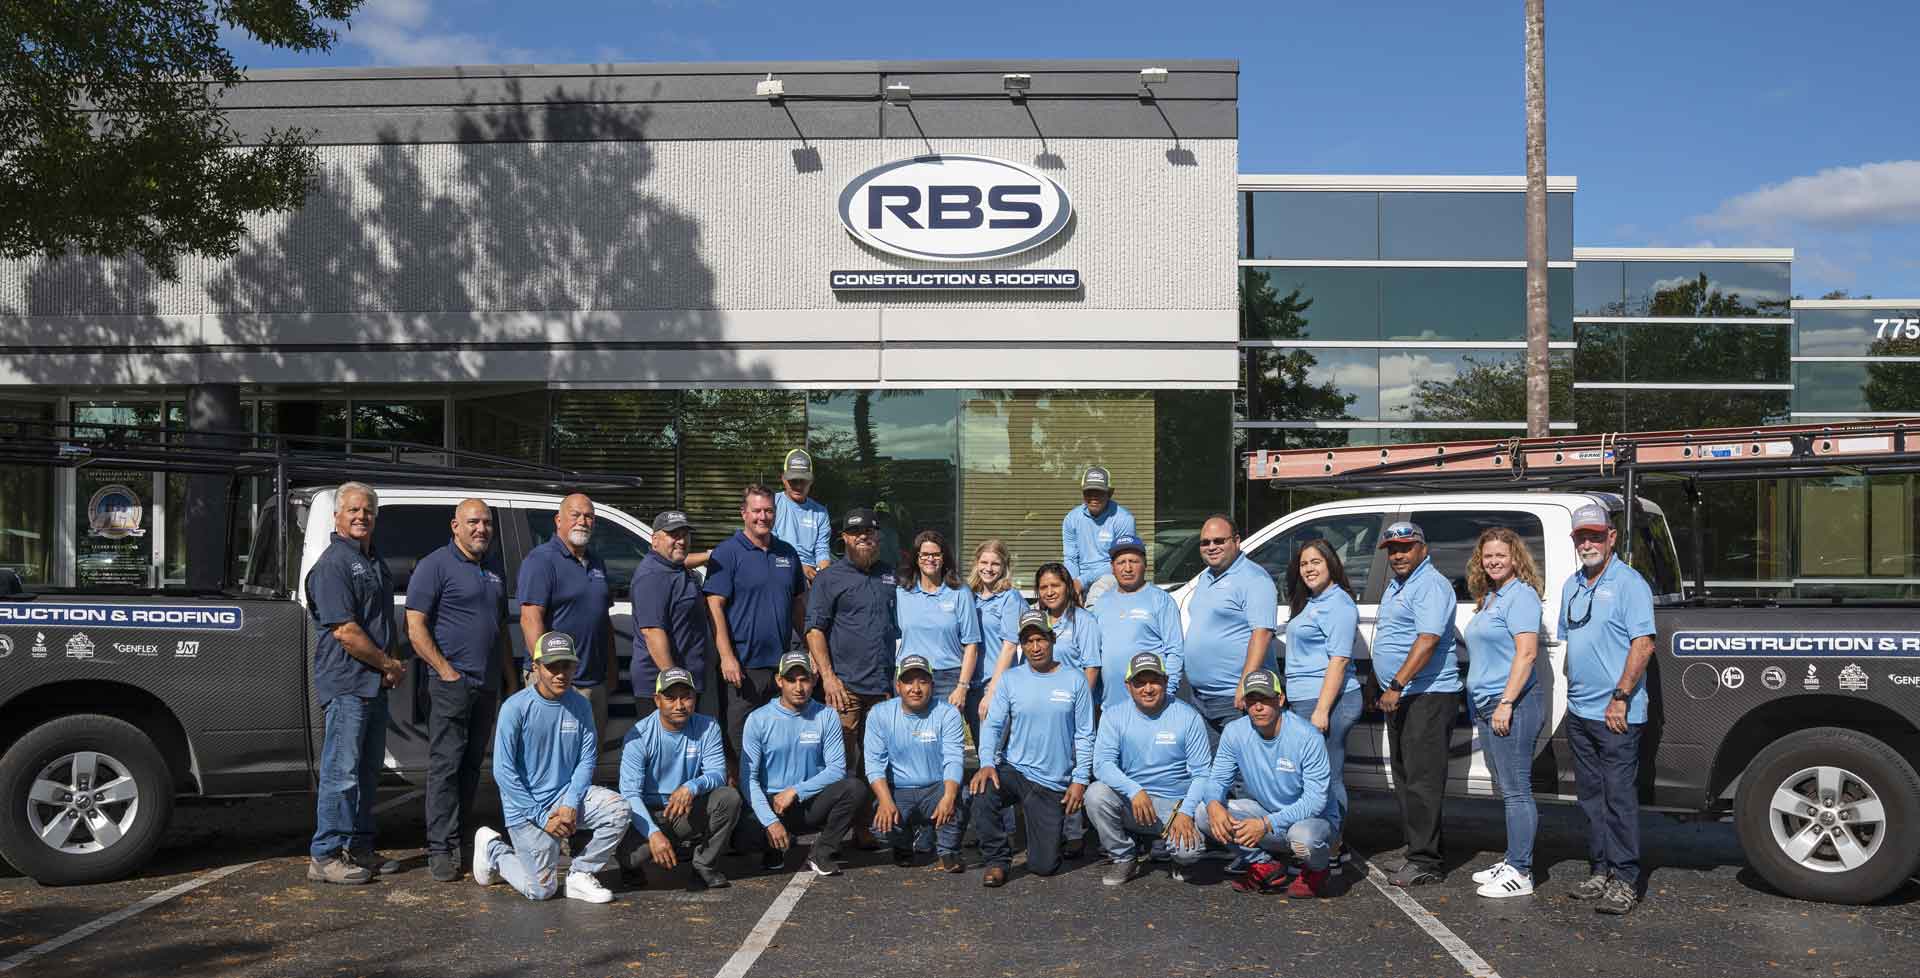 Rbs roofing whole team